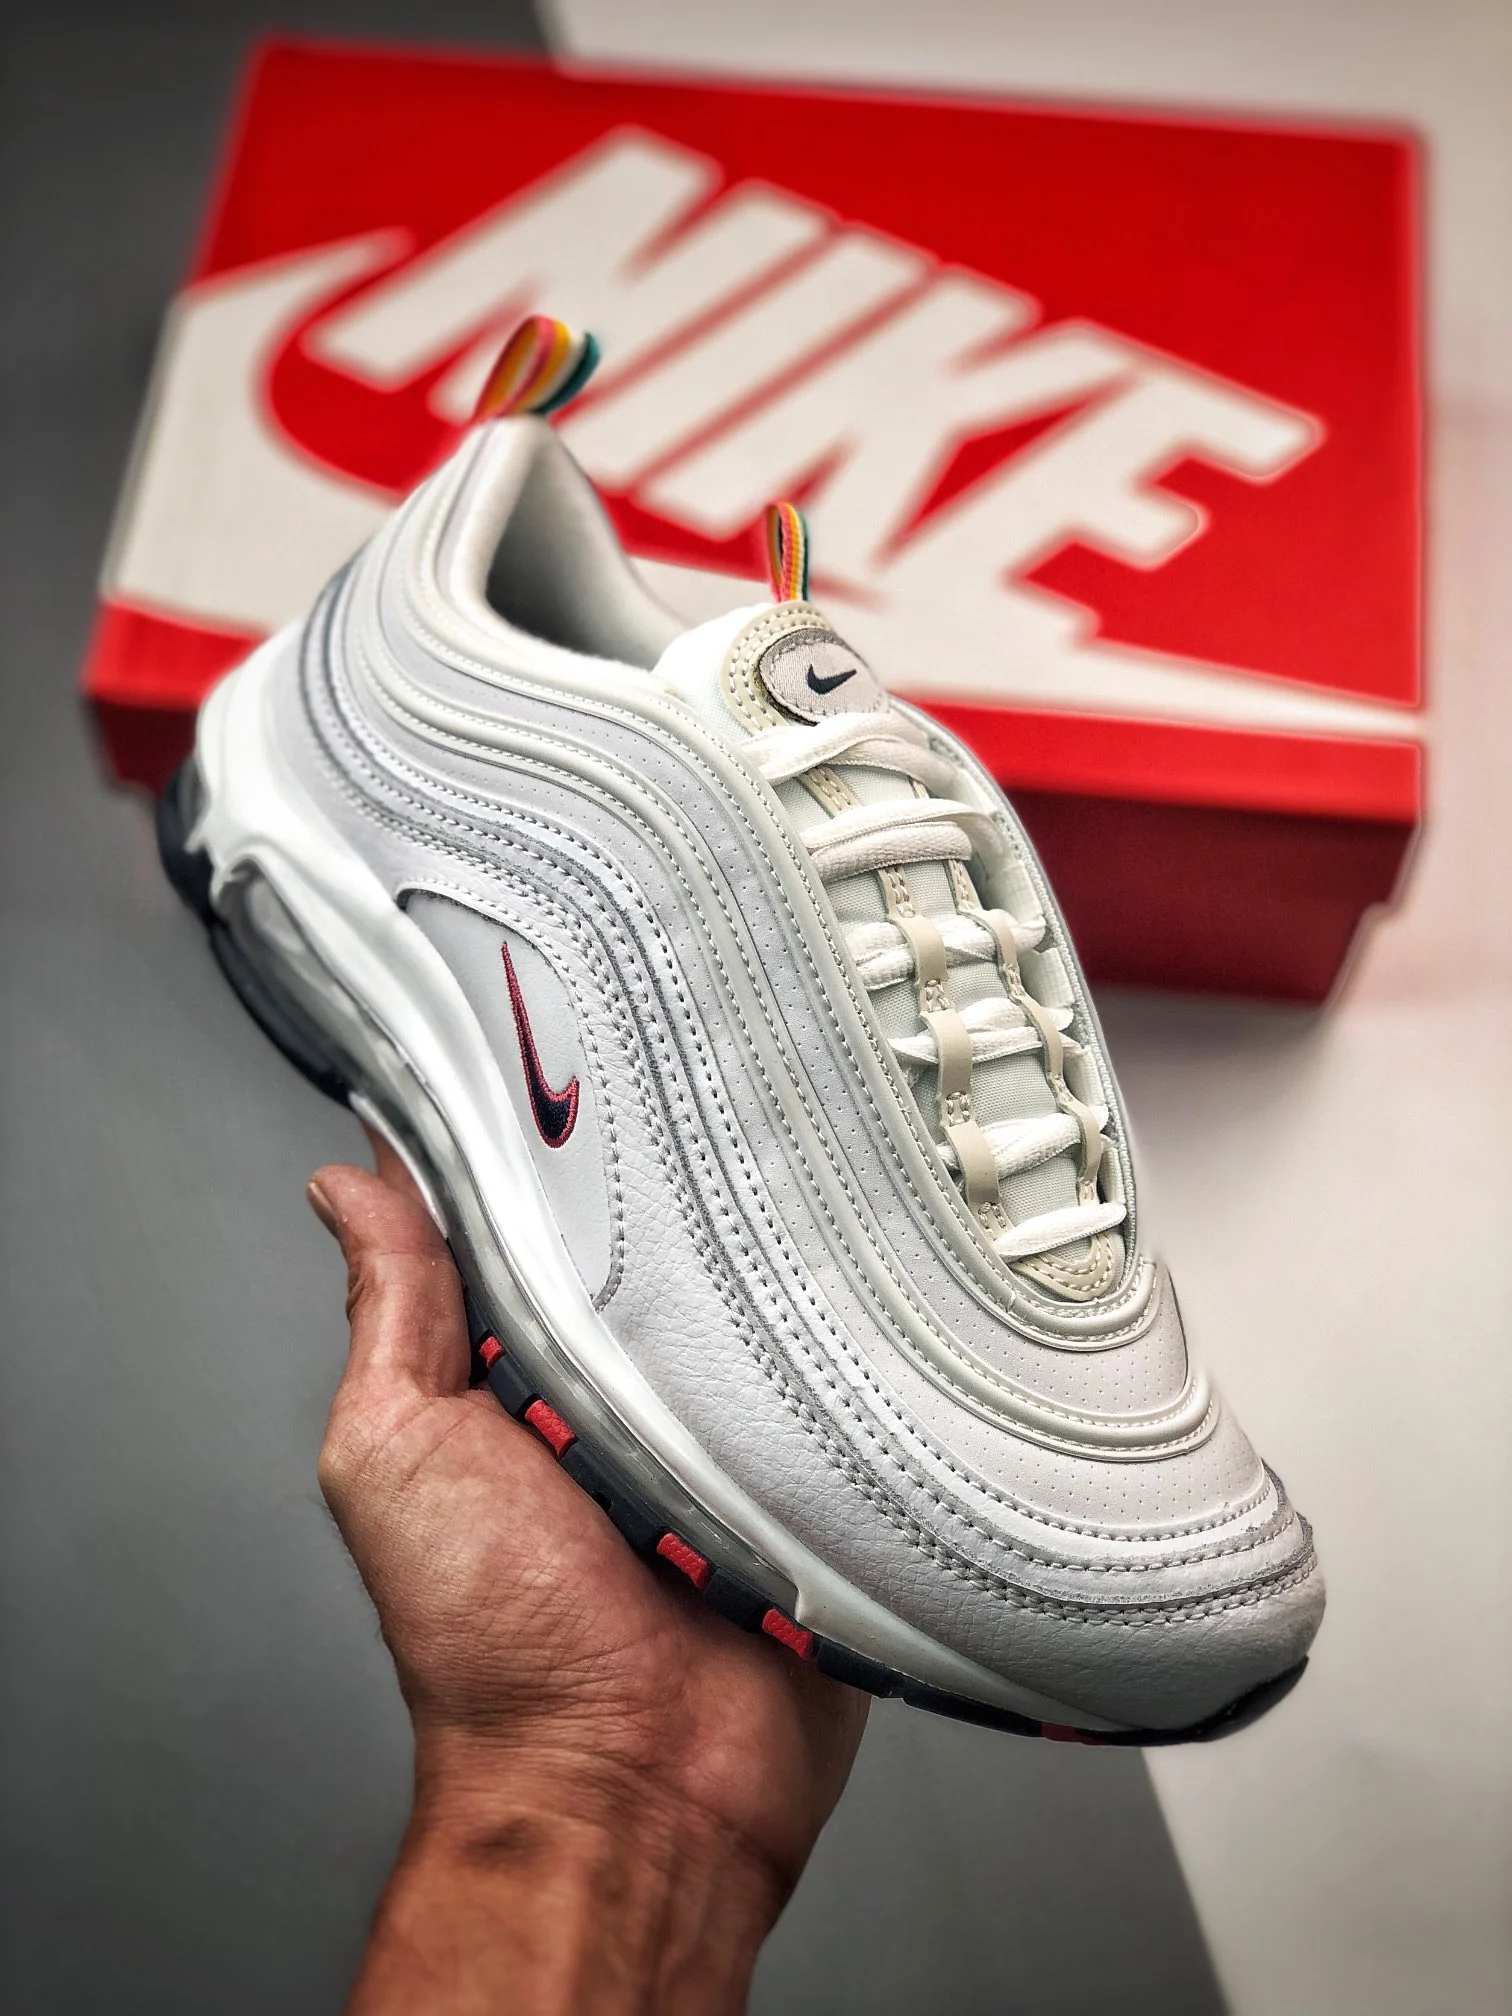 Nike Air Max 97 White Multicolor DH1592-100 For Sale